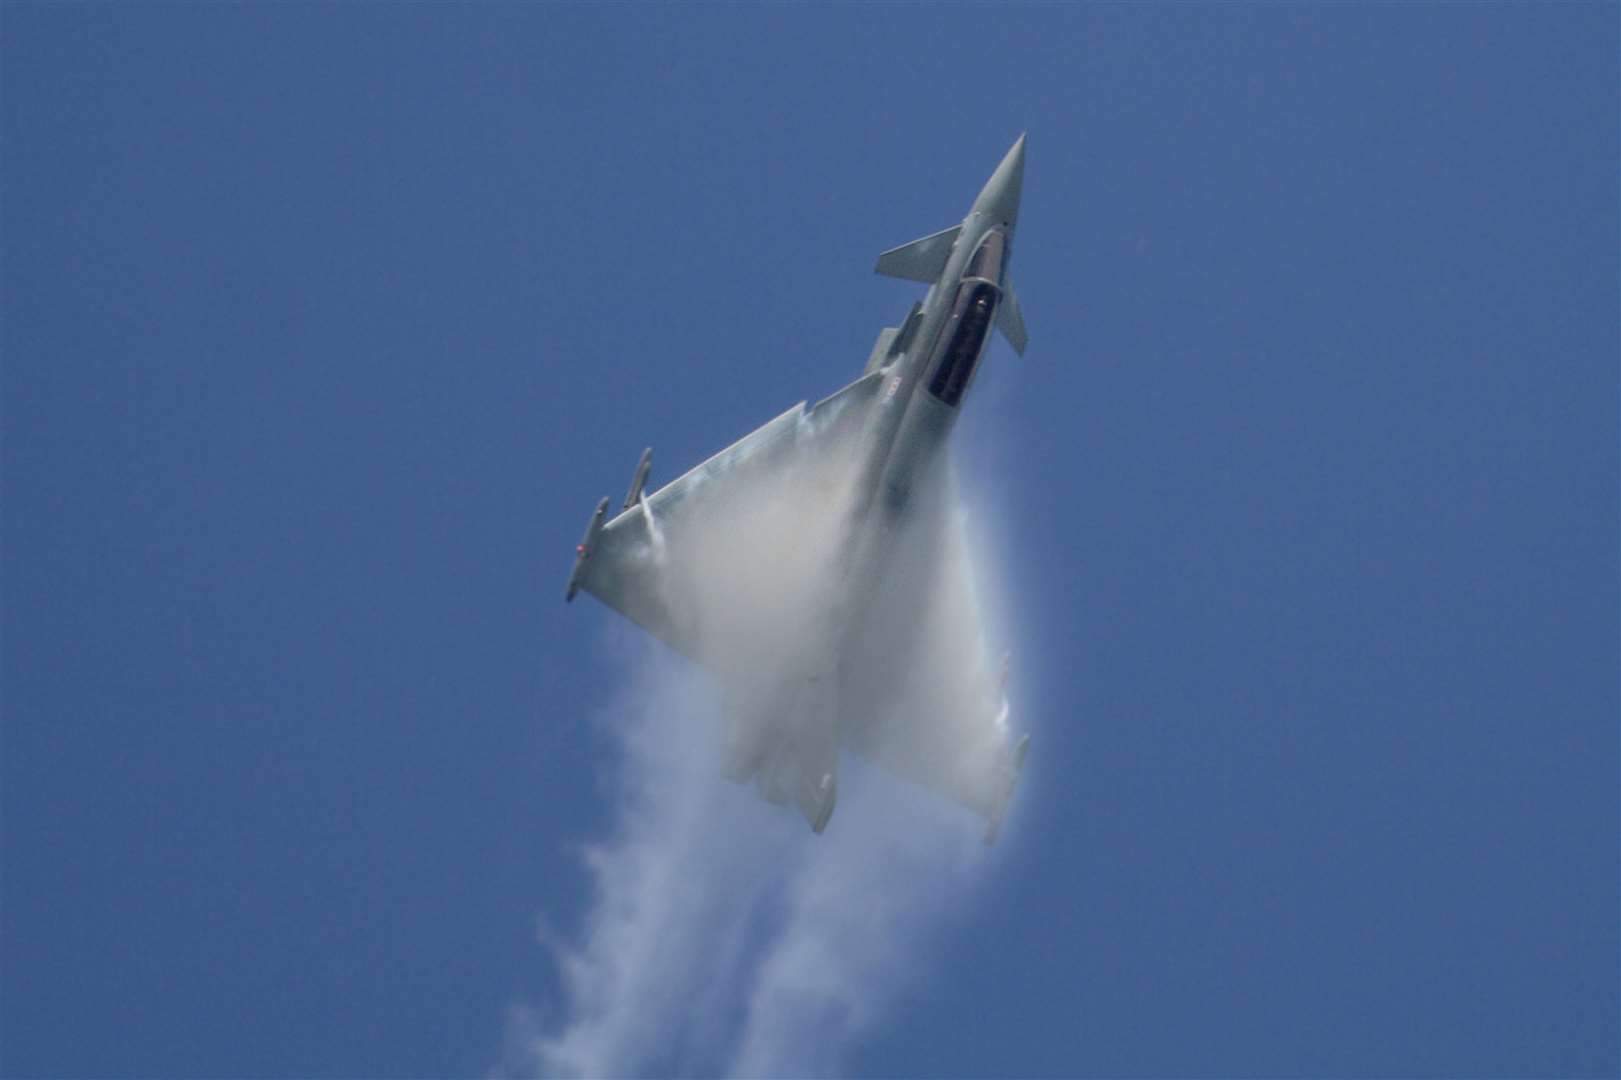 The training exercise involved a RAF Typhoon Fighter aircraft